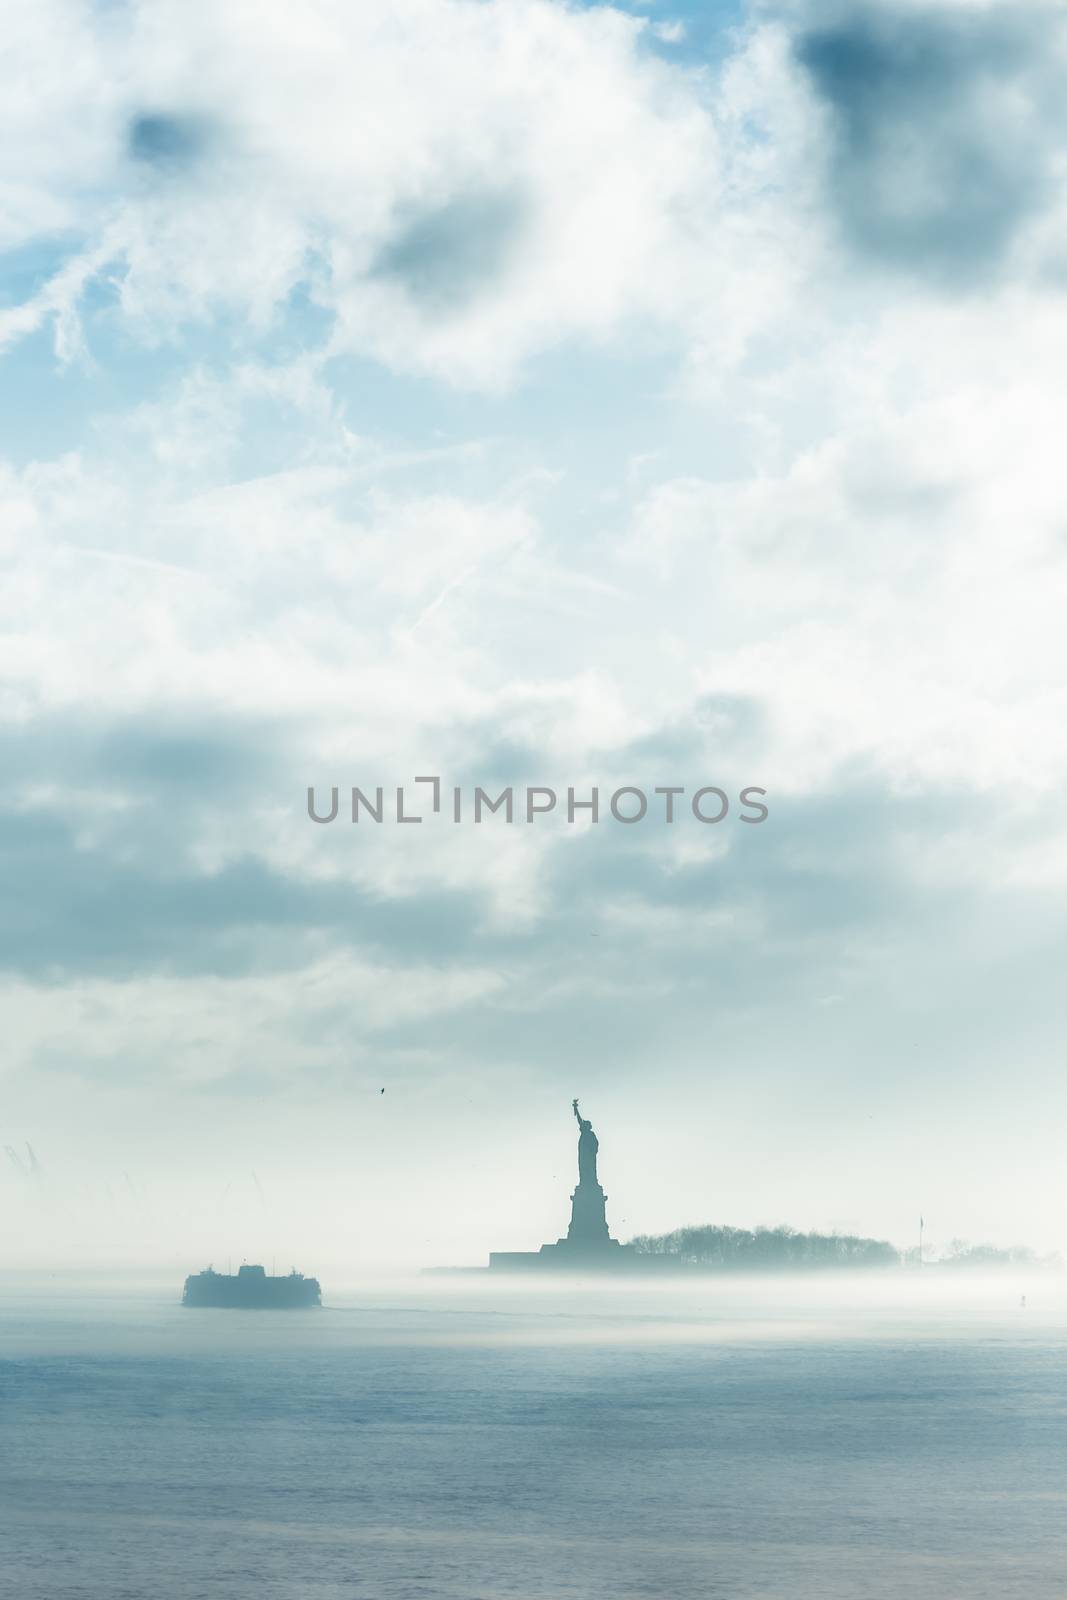 Staten Island Ferry cruises past the Statue of Liberty in dramatic storm. Manhattan, New York City, United States of America. Vertical composition. Copy space.